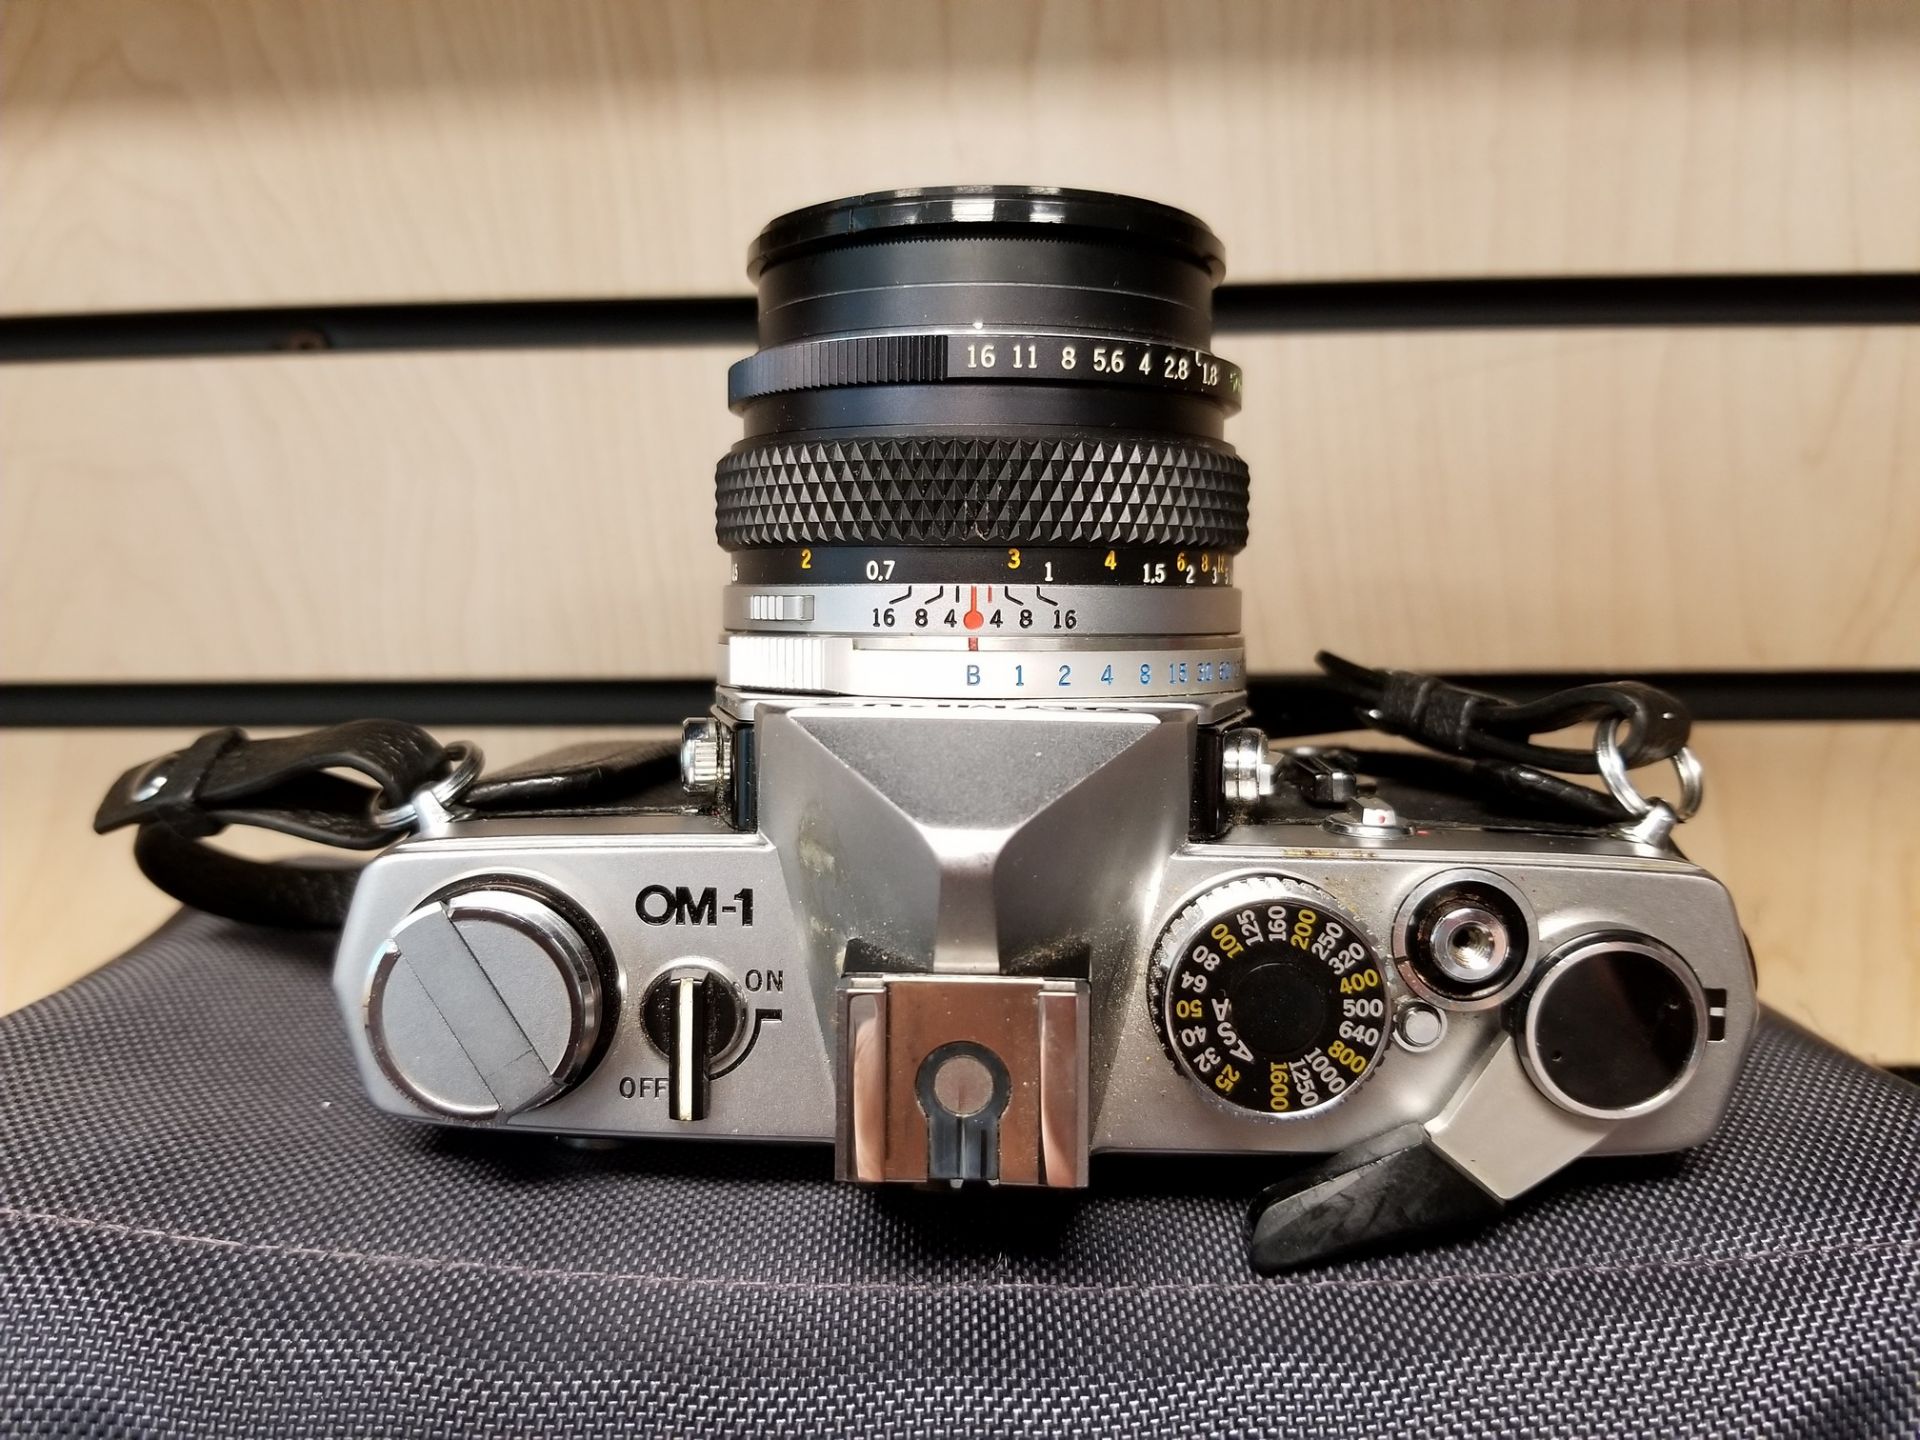 OLYMPUS OM-1 VINTAGE SLR CAMERA WITH VARIOUS FLASH ATTACHMENTS, LENSES AND CARRY CASE (LOCATED IN - Image 6 of 6